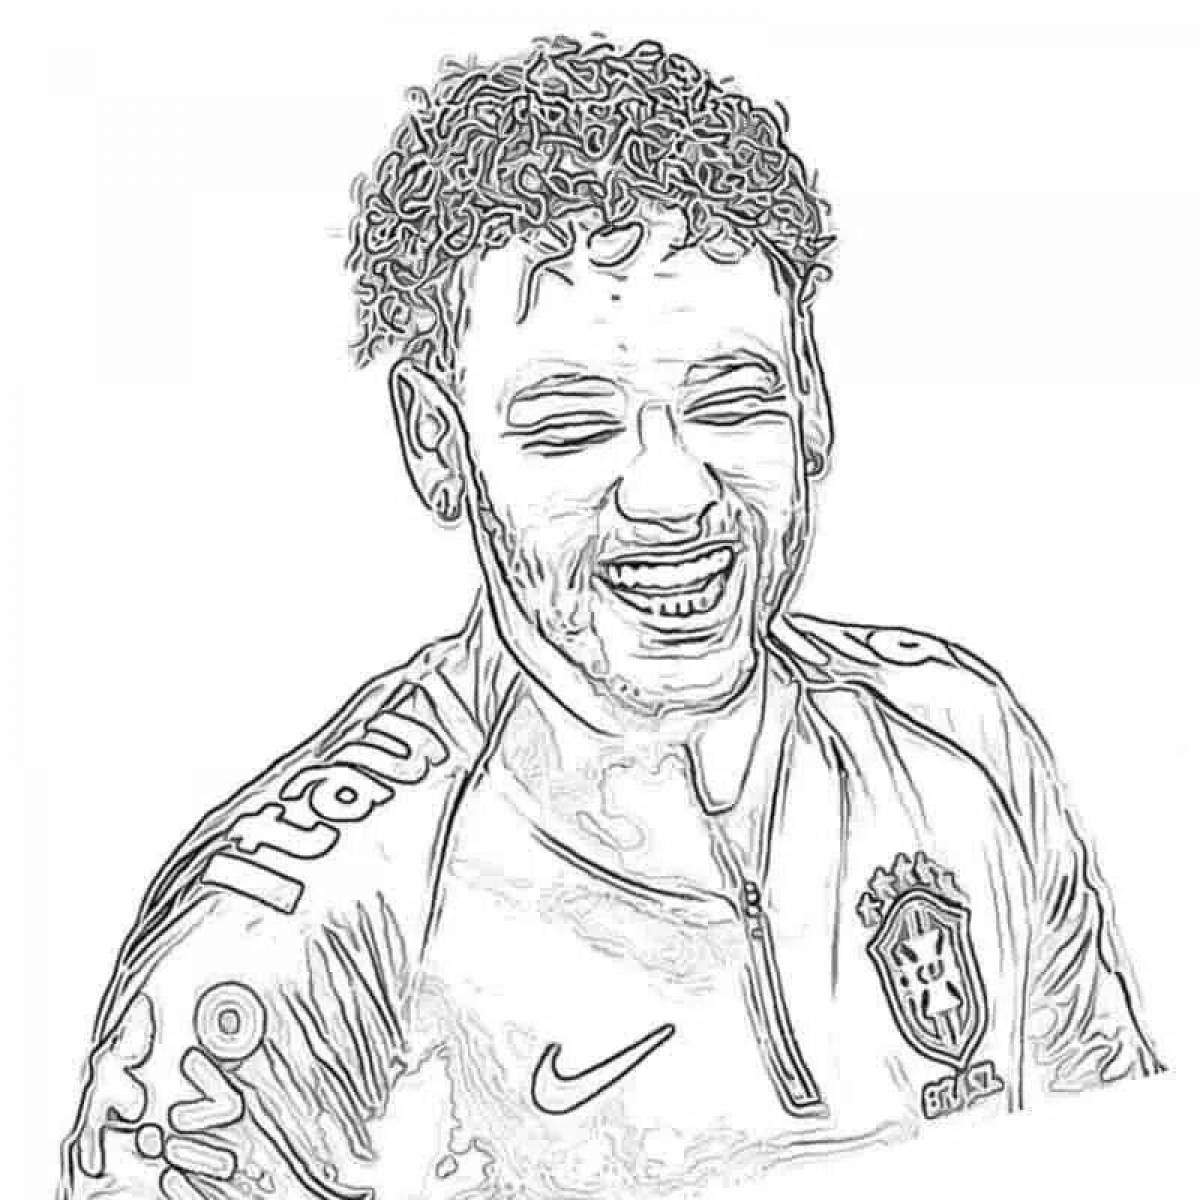 Coloring page charming soccer player neymar